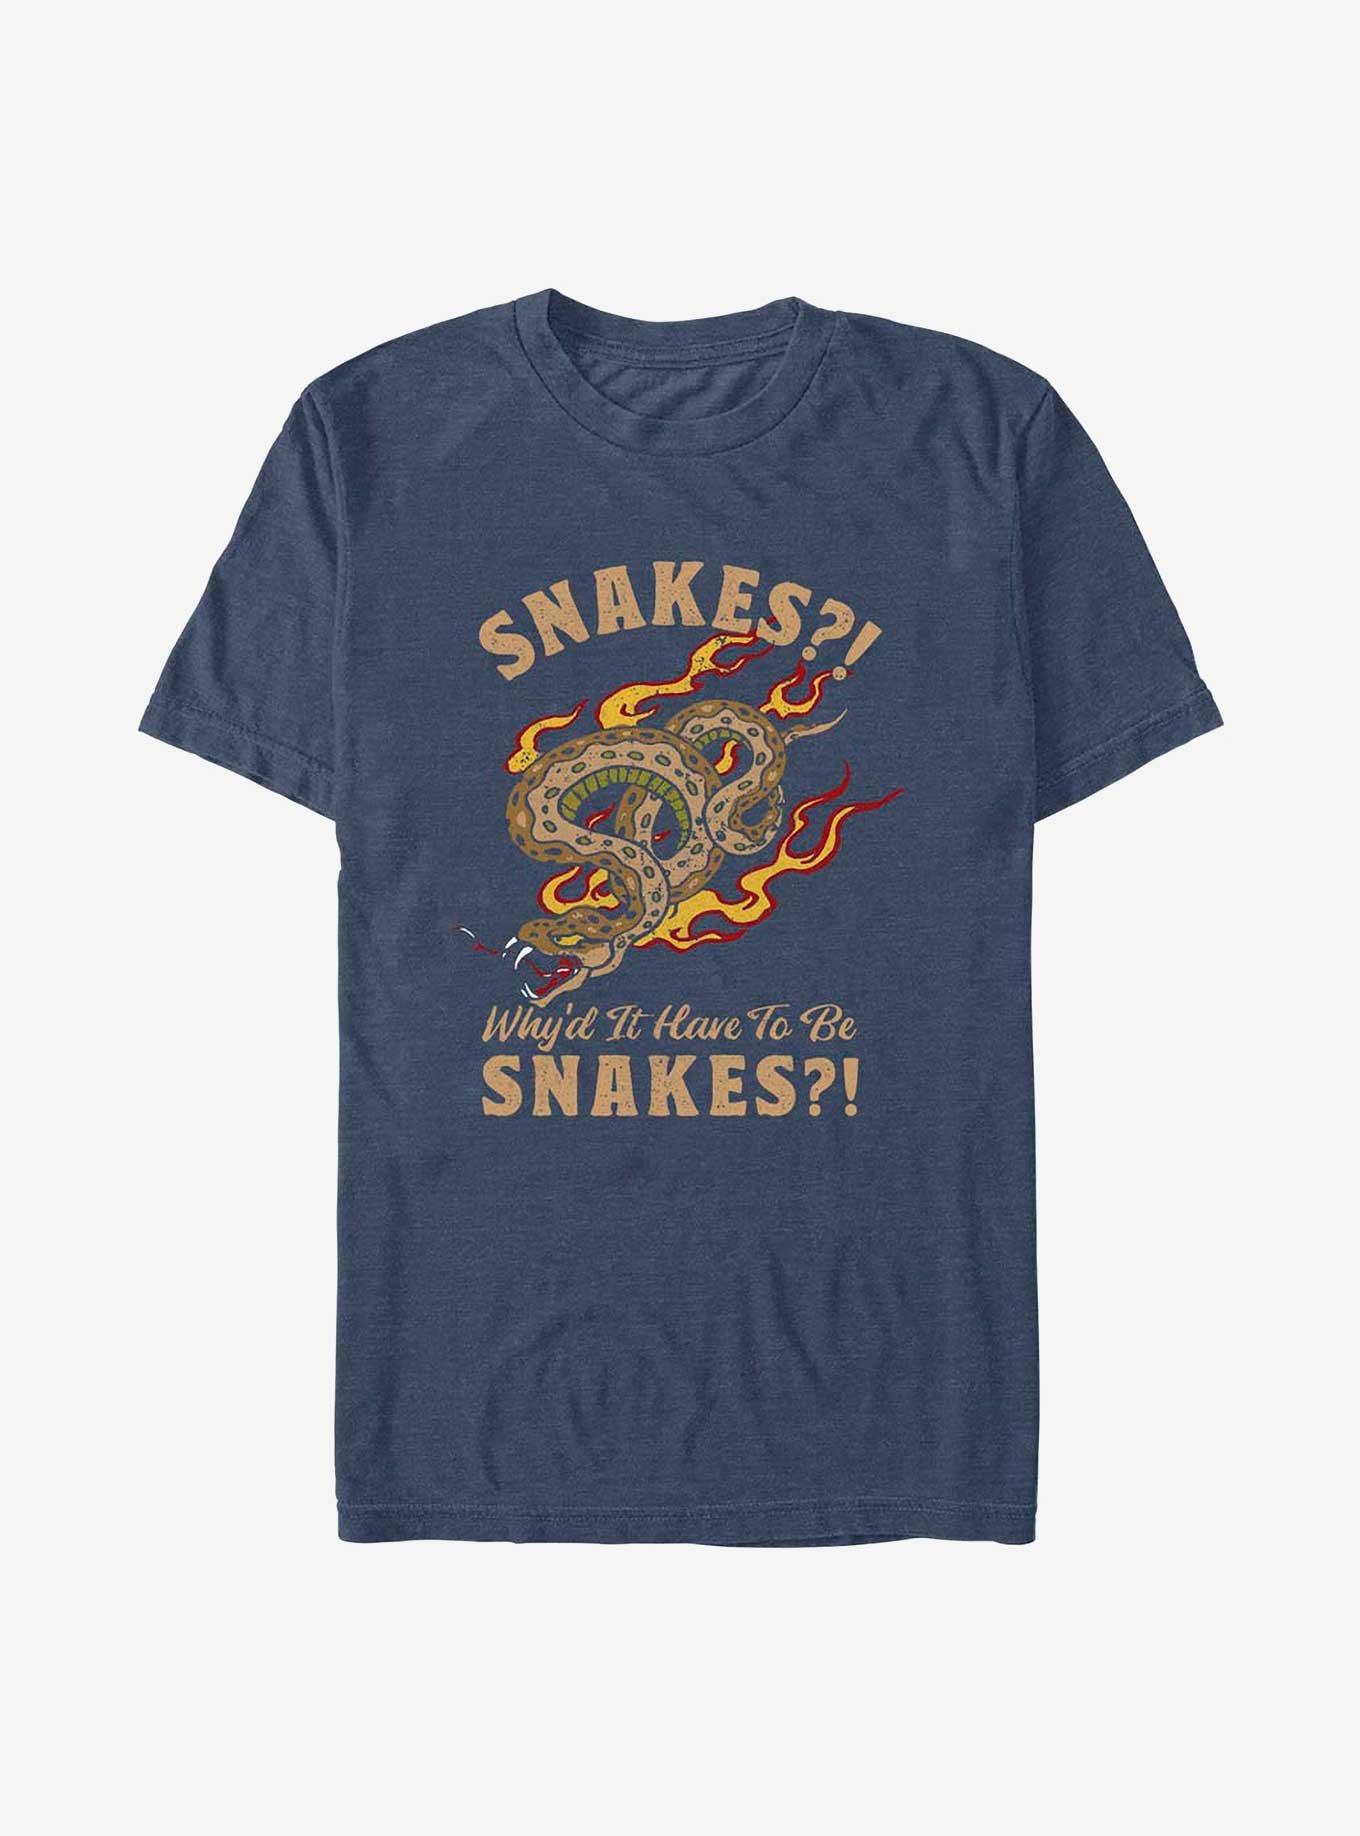 Indiana Jones Why'd It Have To Be Snakes T-Shirt, NAVY HTR, hi-res